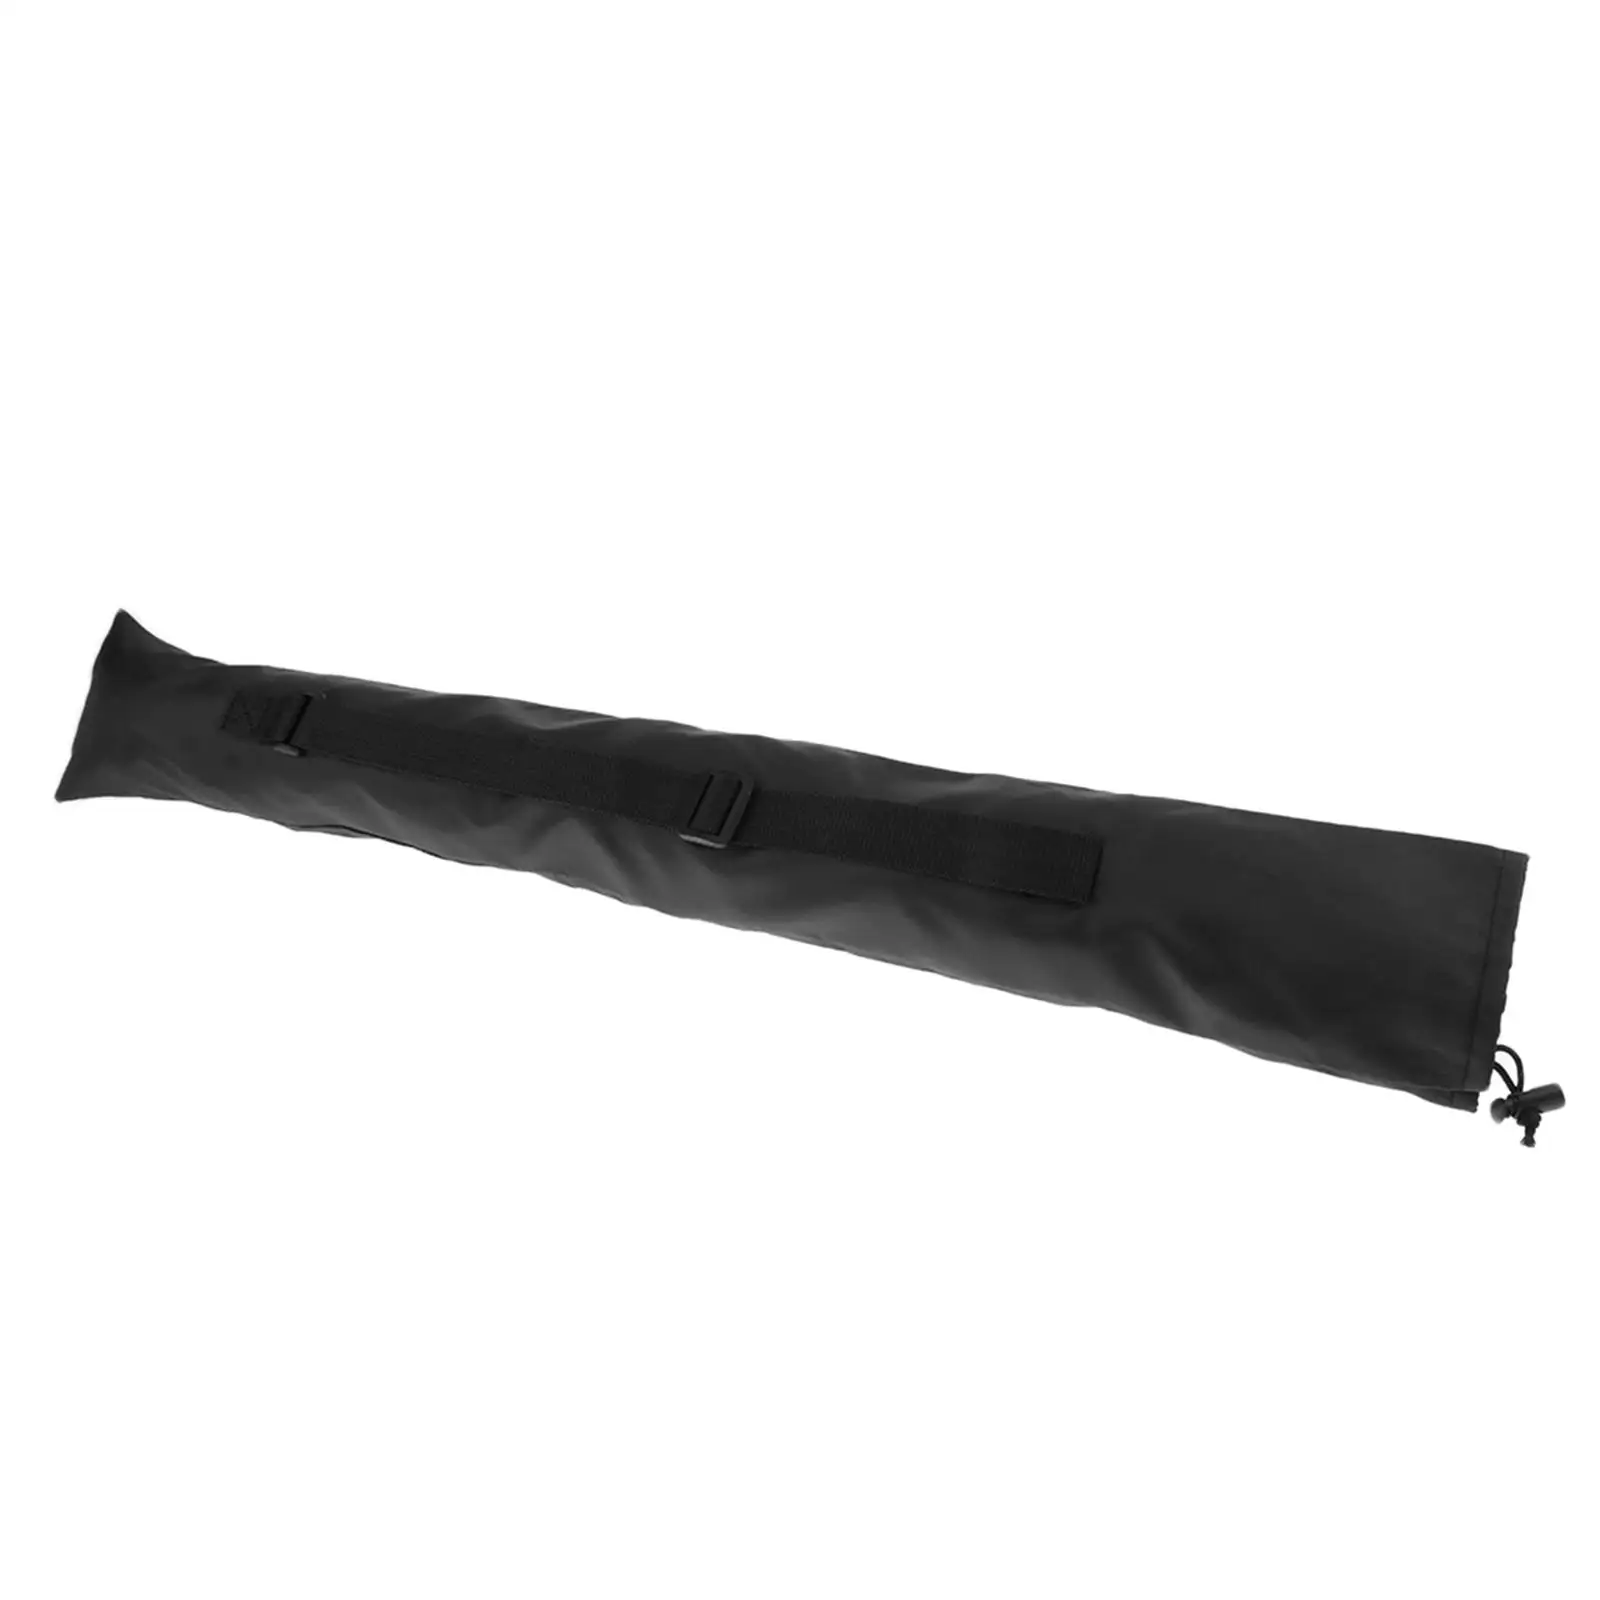 Walking Pole Carry Bag for Hiking Poles, Climbing Mountaineering s Carrying Bag